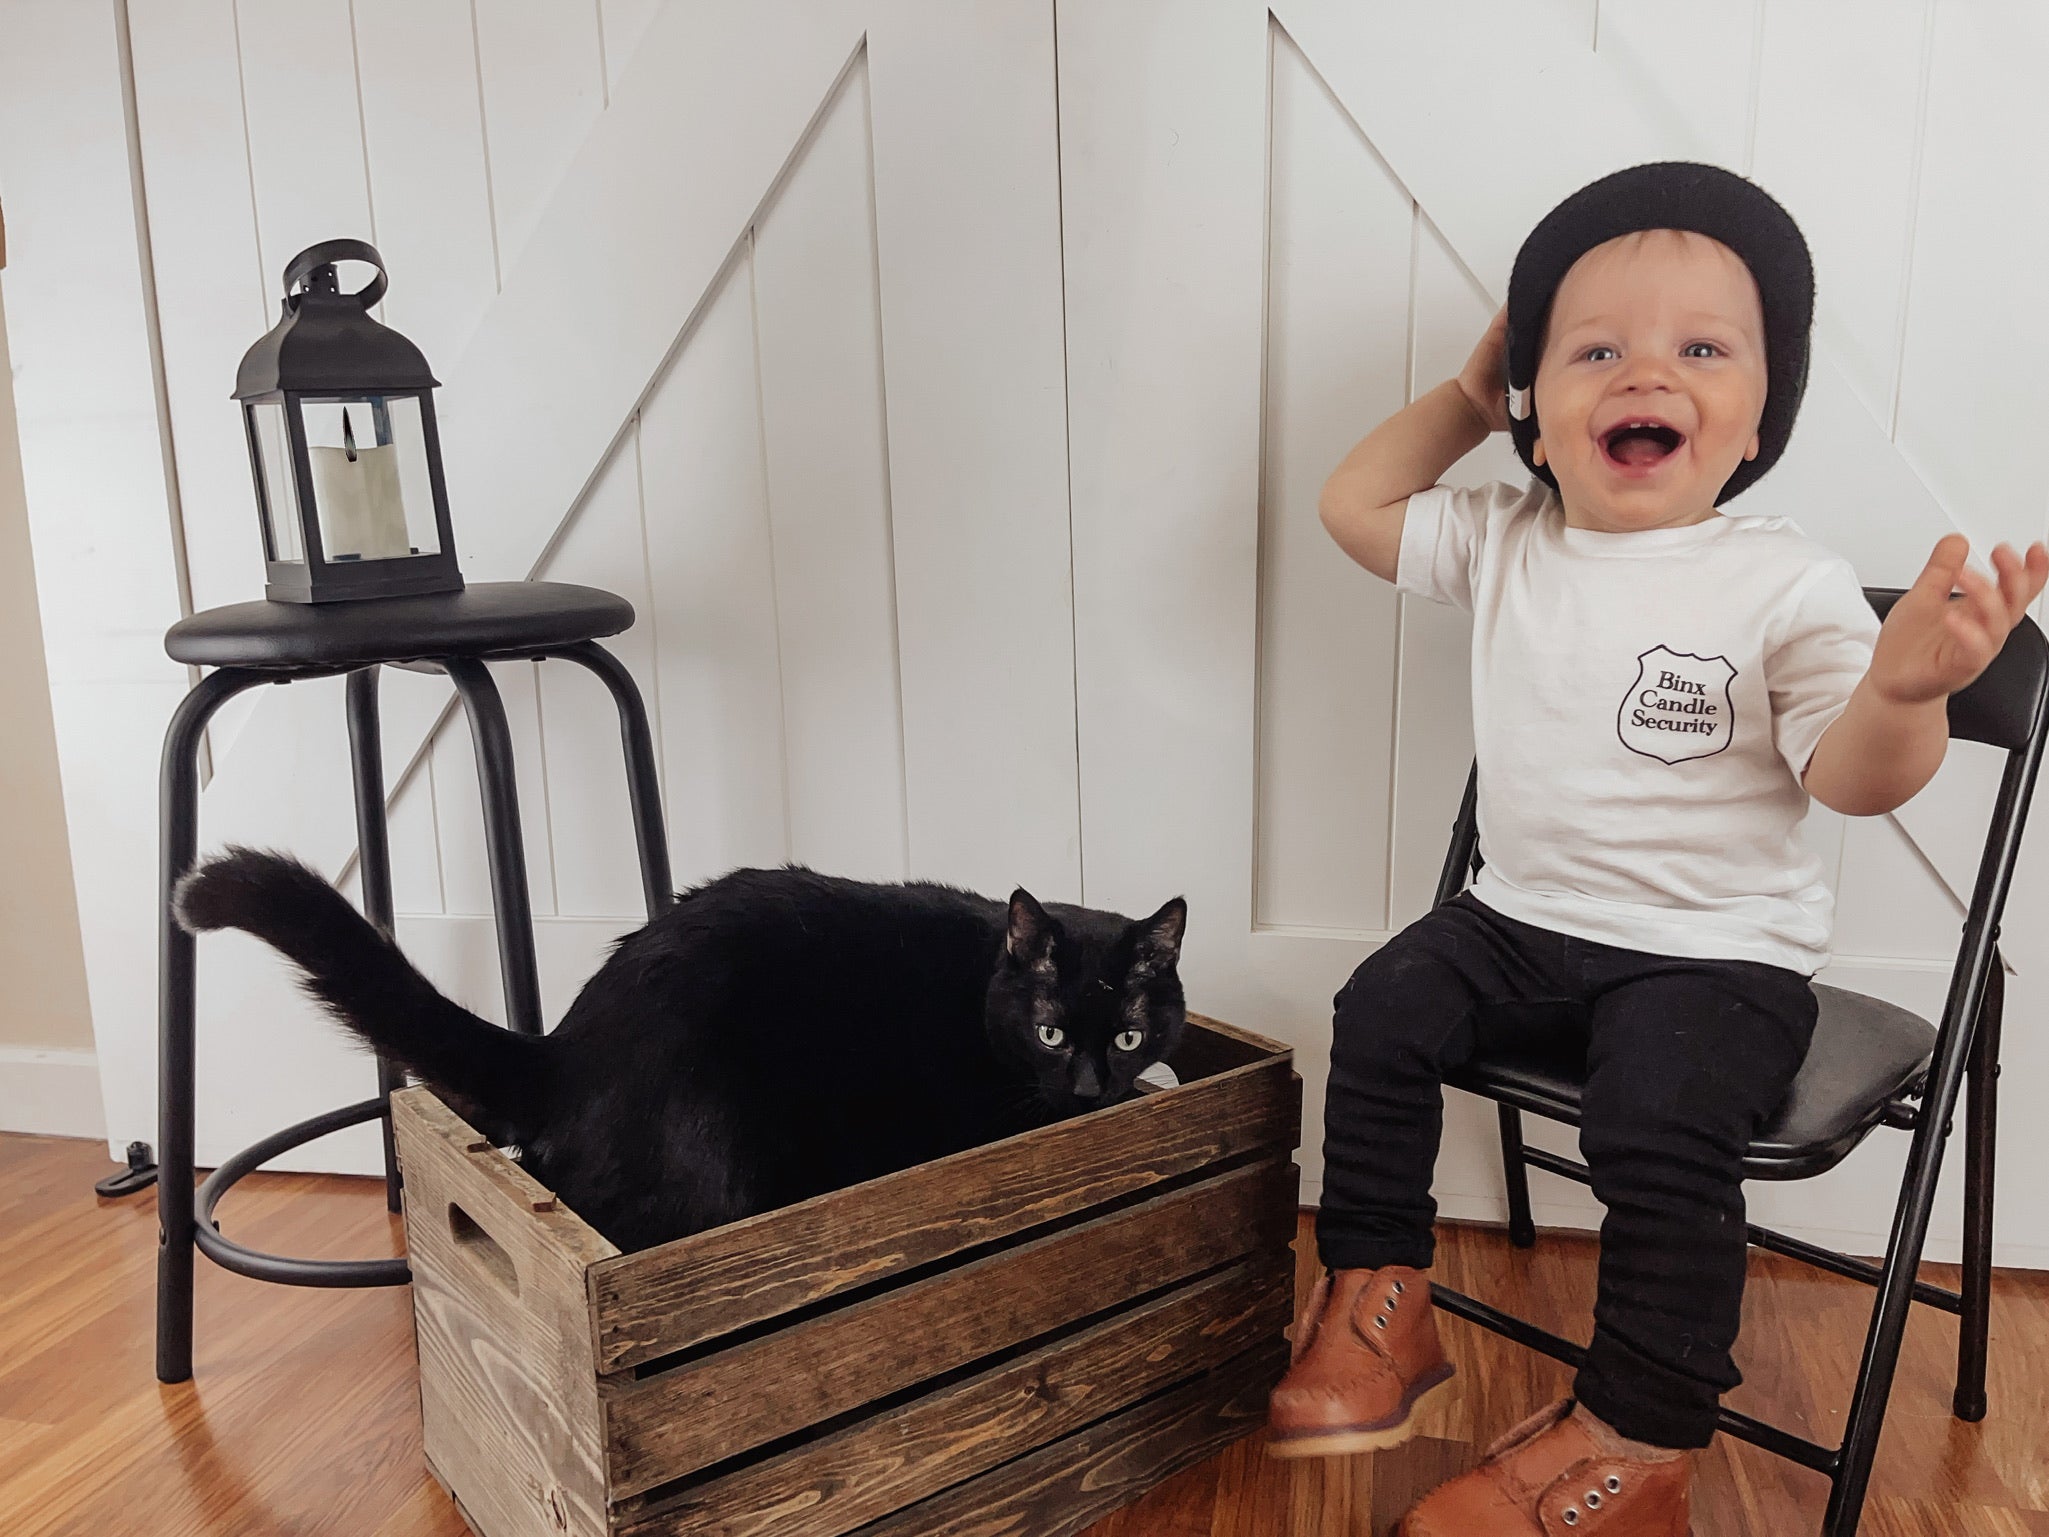 1 year old boy wearing a Hocus Pocus shirt. The shirt has a "Binx Candle Security" badge on the front left breast pocket area. The back of the shirt has a silhouette of a black cat and the words Salem, MA. EST. 1693 under it. There is a black cat crouched down in the photo next to the child. 